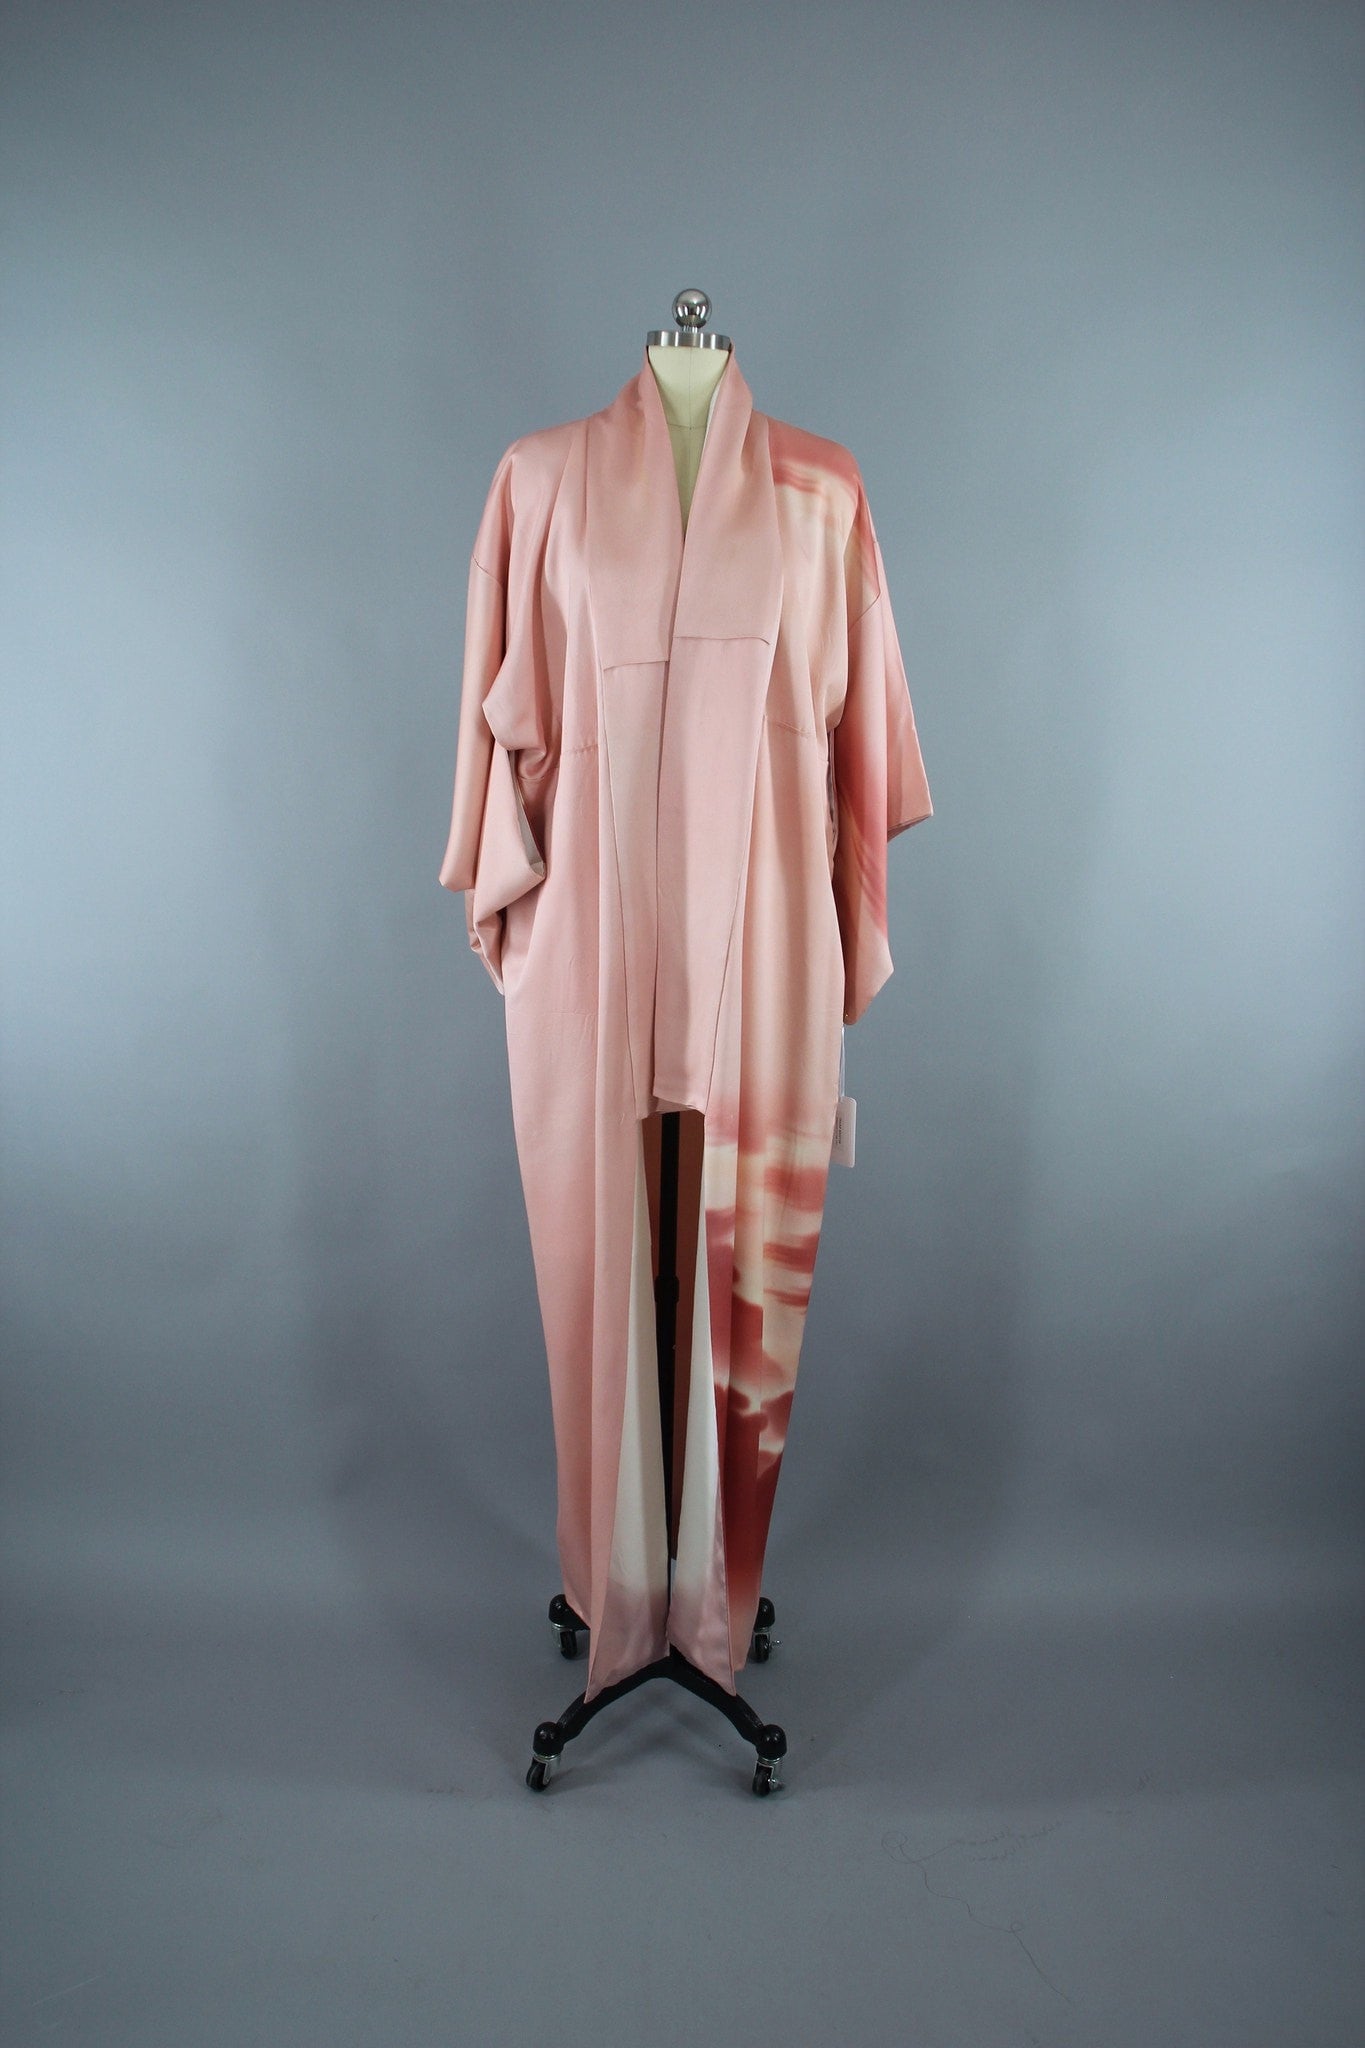 1970s Vintage Kimono Robe with Pink Clouds Print - ThisBlueBird